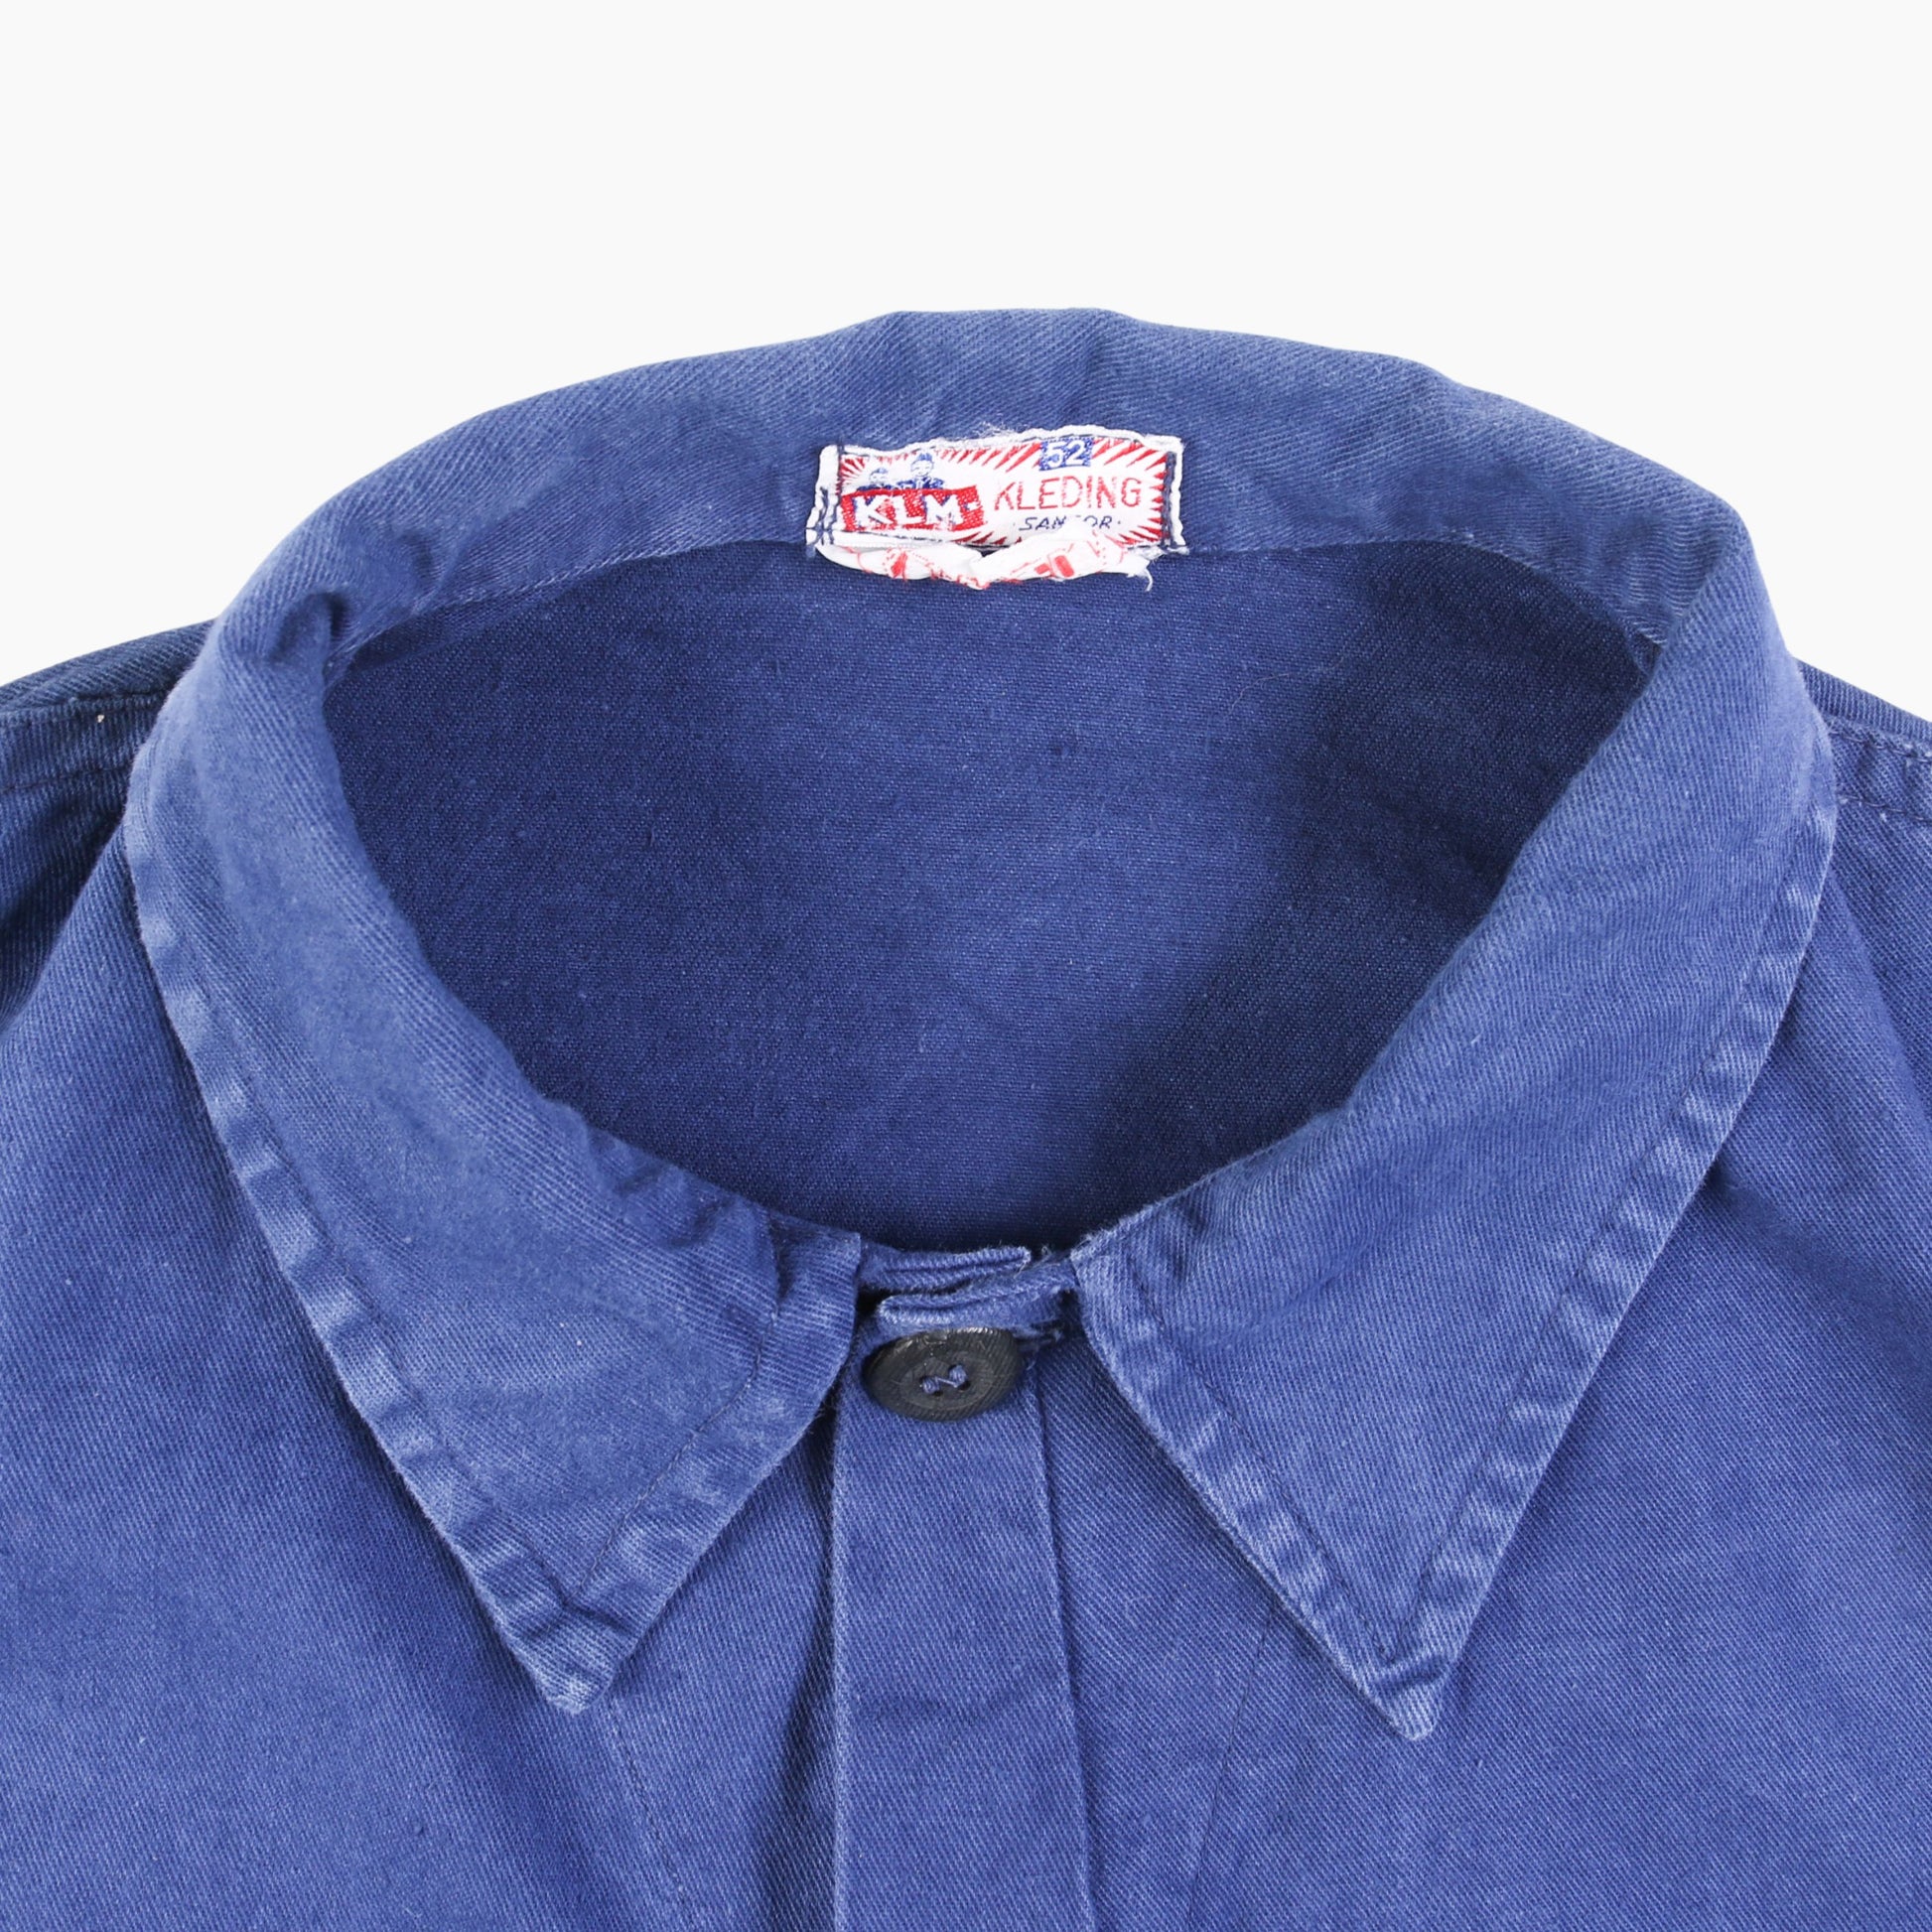 French Workwear Jacket - American Madness